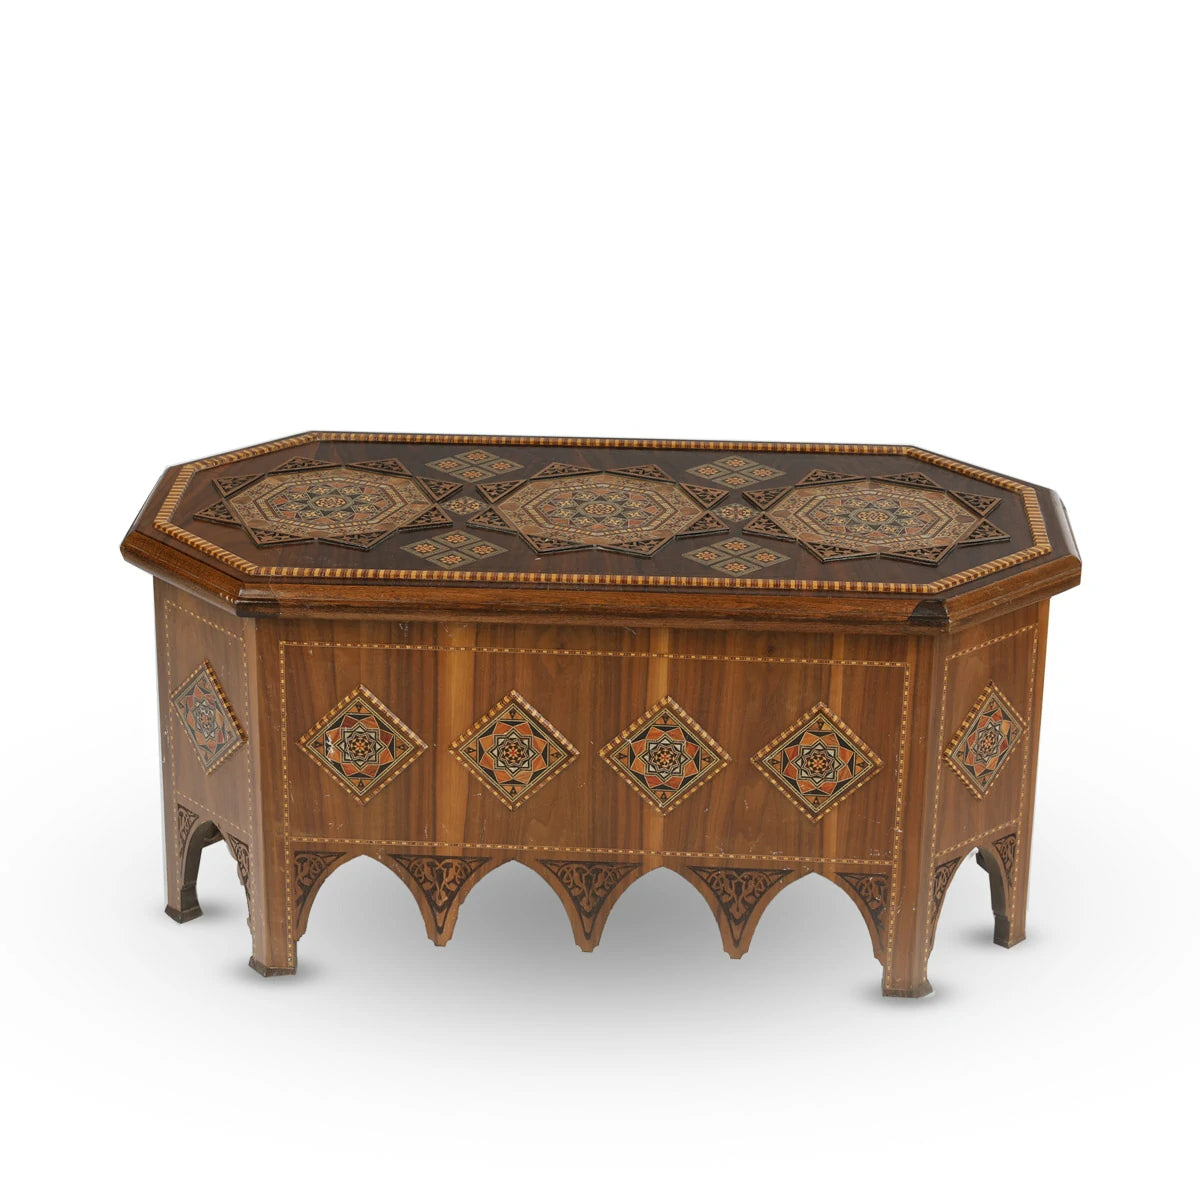 Frontal View of Arabian Thick Wood Mosaic Table